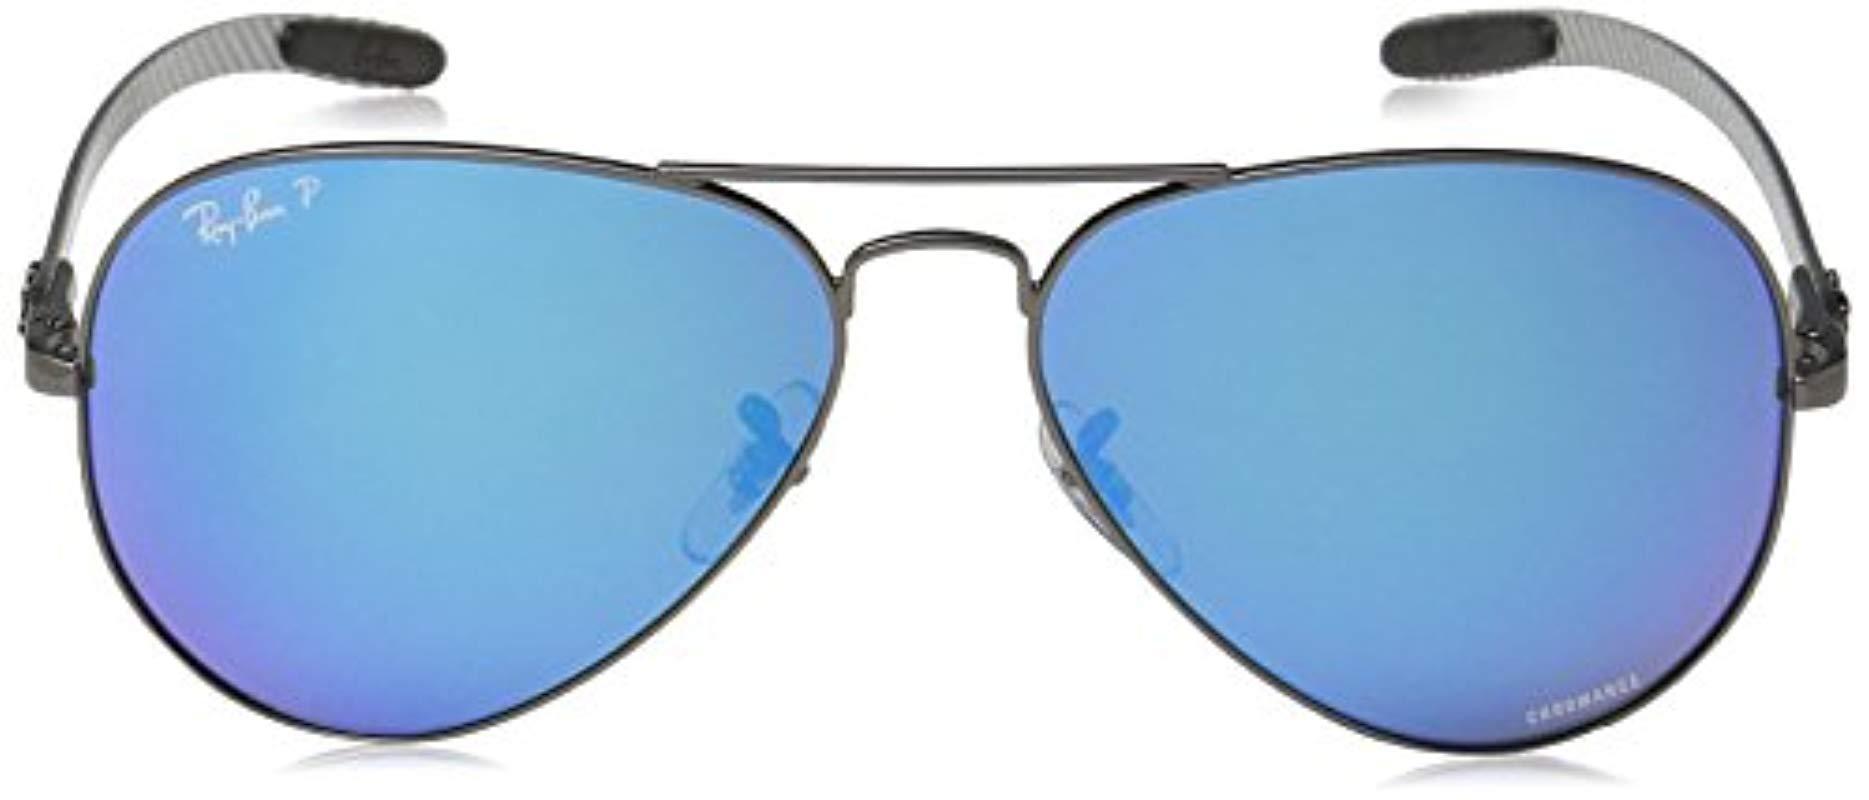 Ray-Ban Rb8317ch Chromance Mirrored Aviator Sunglasses in Blue for Men -  Lyst